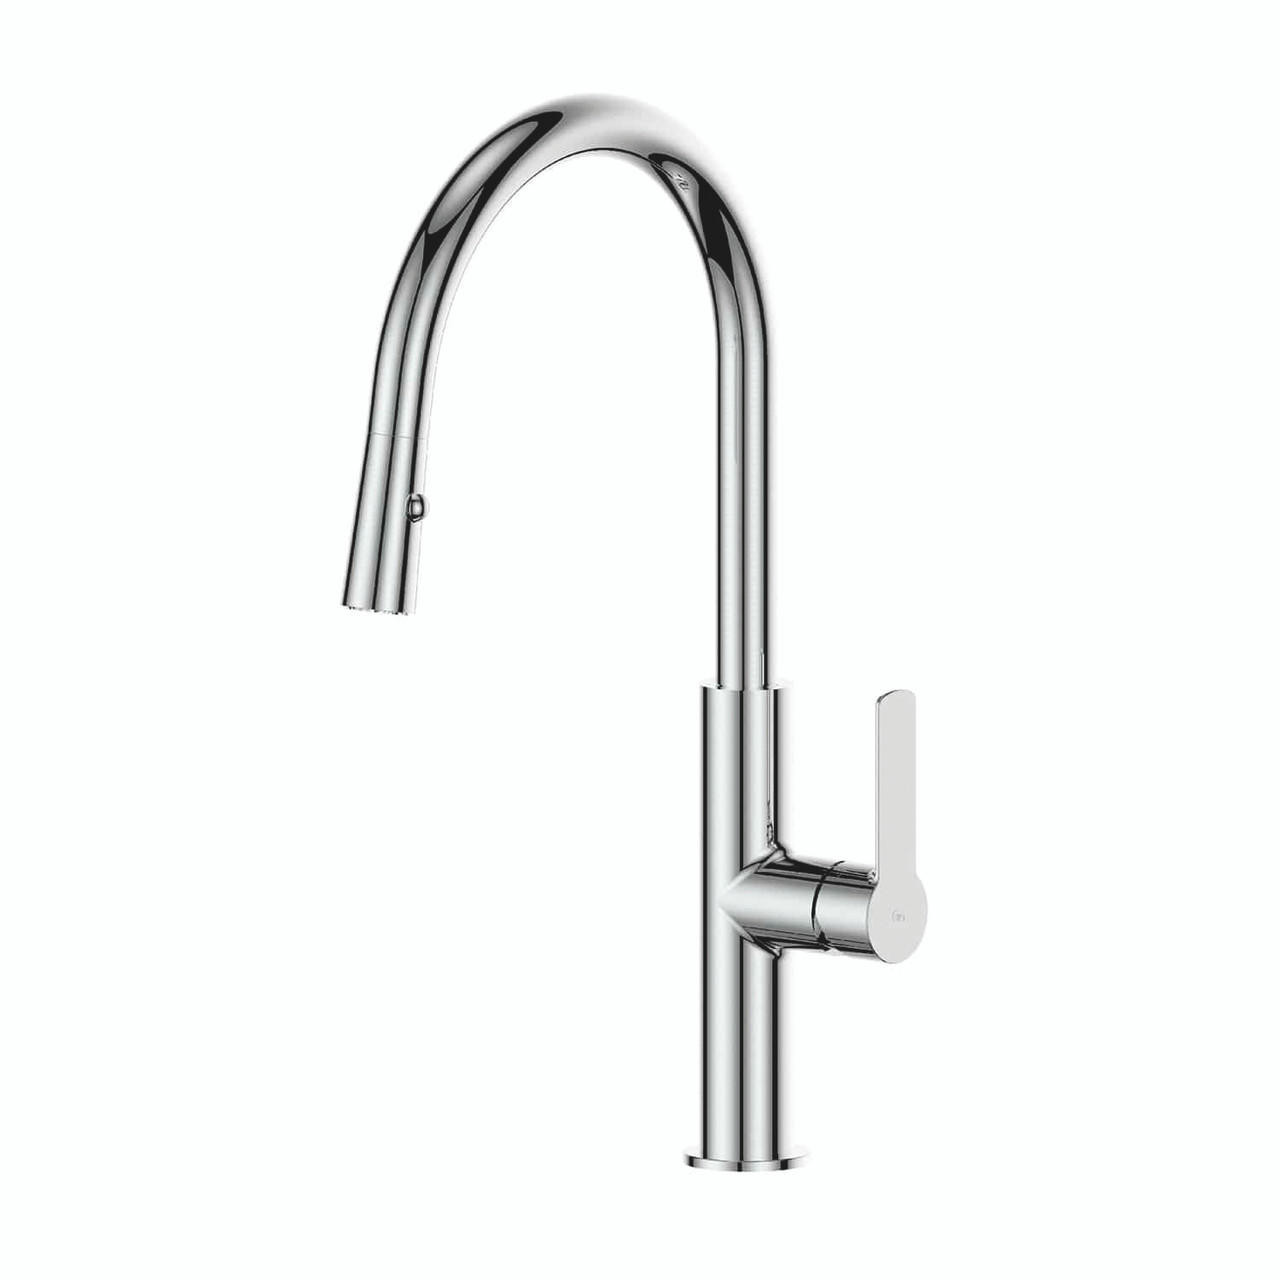 Astro II Pull-Down Chrome Sink Mixer